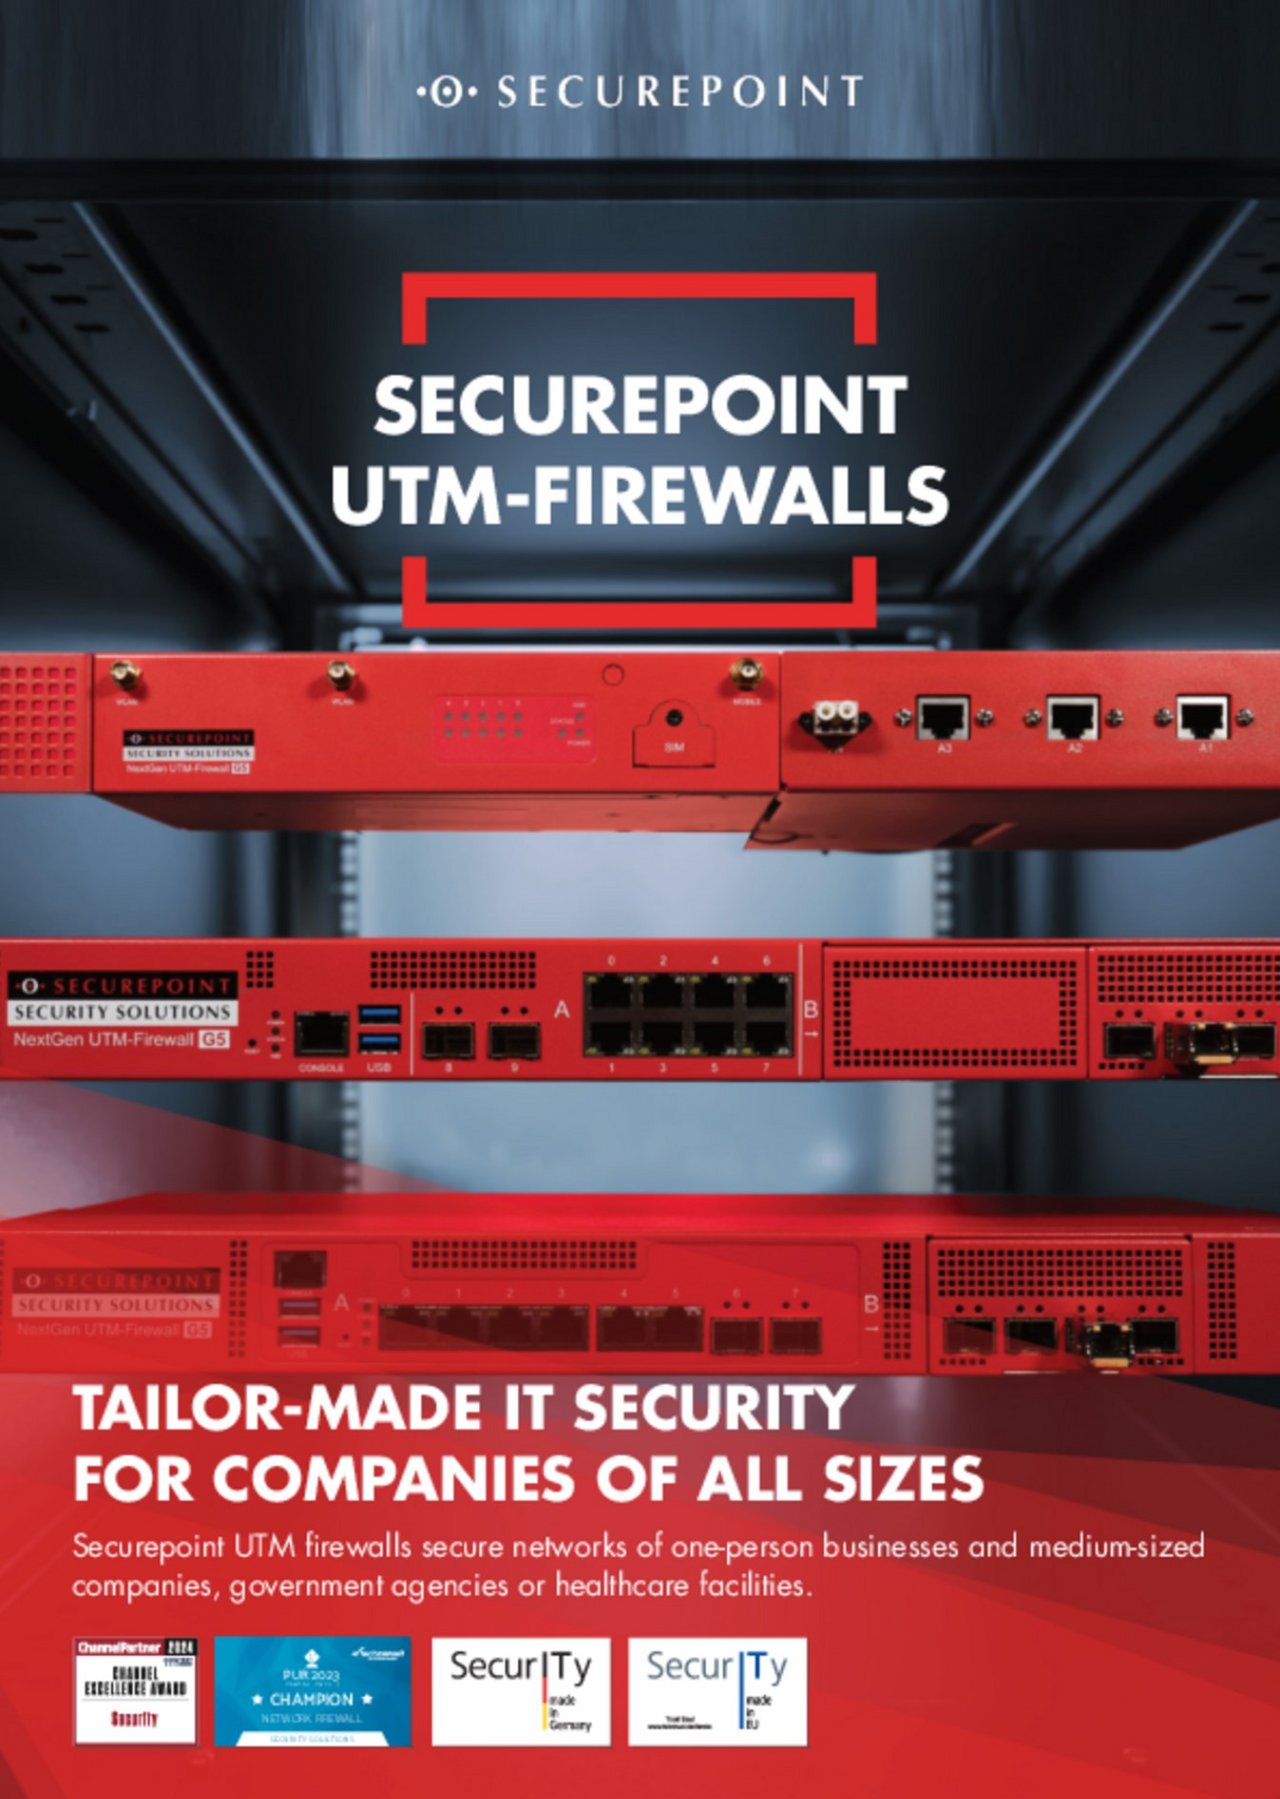 Title of the prospect for Securepoint UTM Firewall.